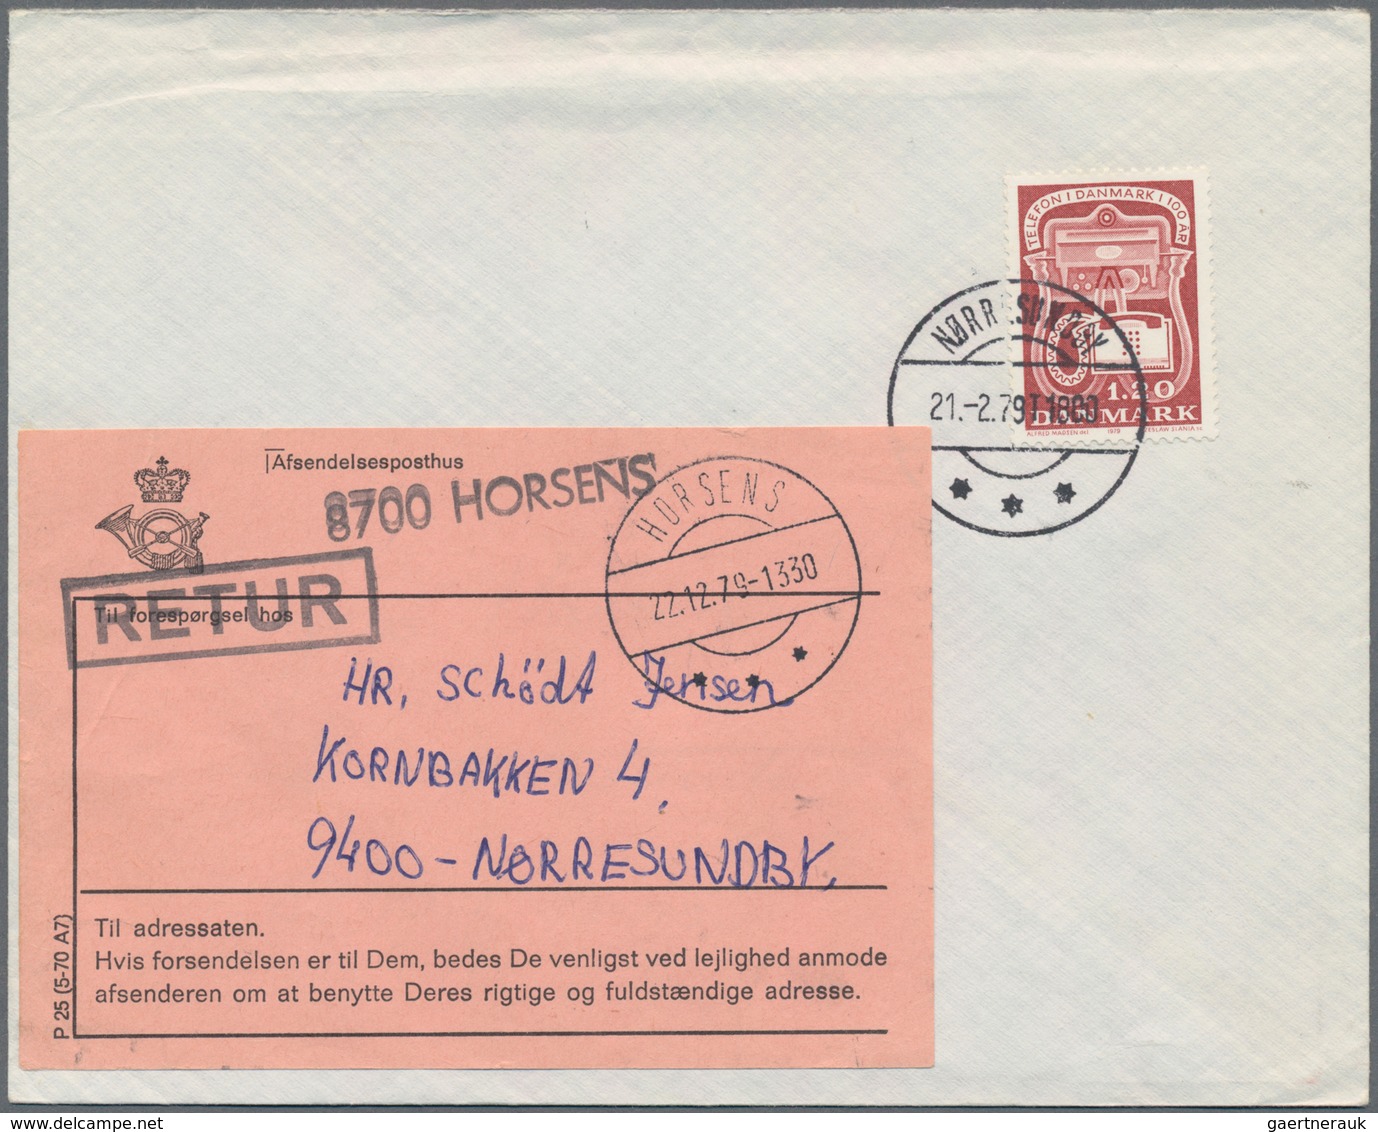 Dänemark: 1870/1995, holding of ca. 200 letters, cards and postal stationery, incl. registered mail,